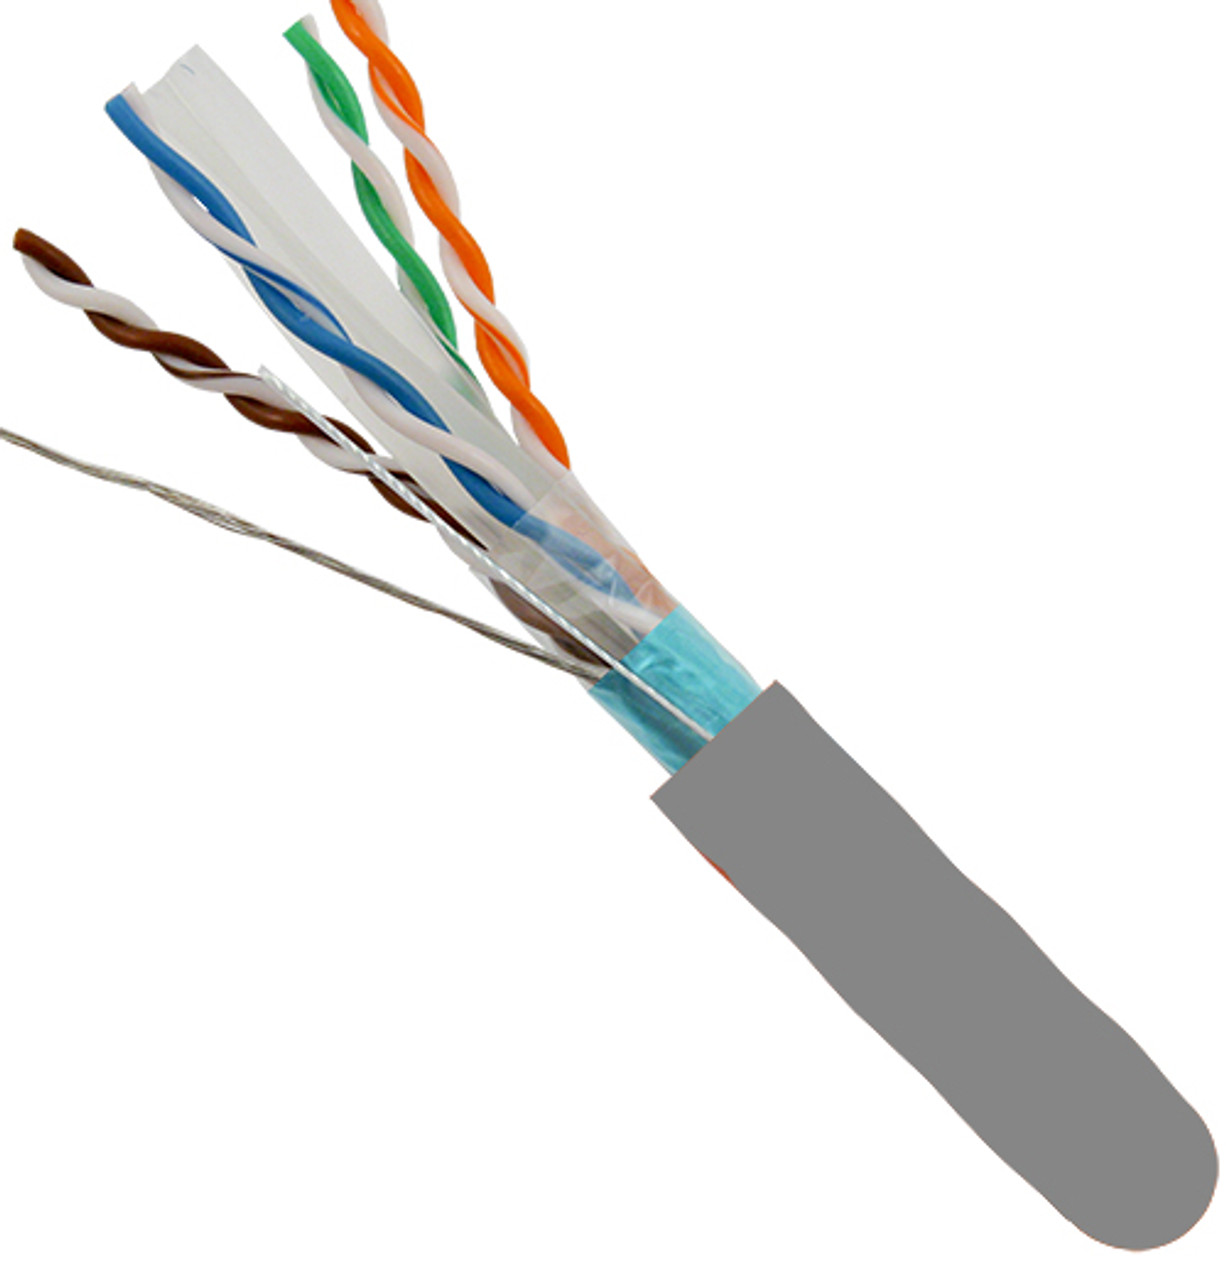 CAT6A (Augmented) 10Gb, Shielded F/UTP , 1000, 8-Conductor, PVC Jacket, AWG23 Solid-Bare Copper, 1000ft Wooden Spool, Gray